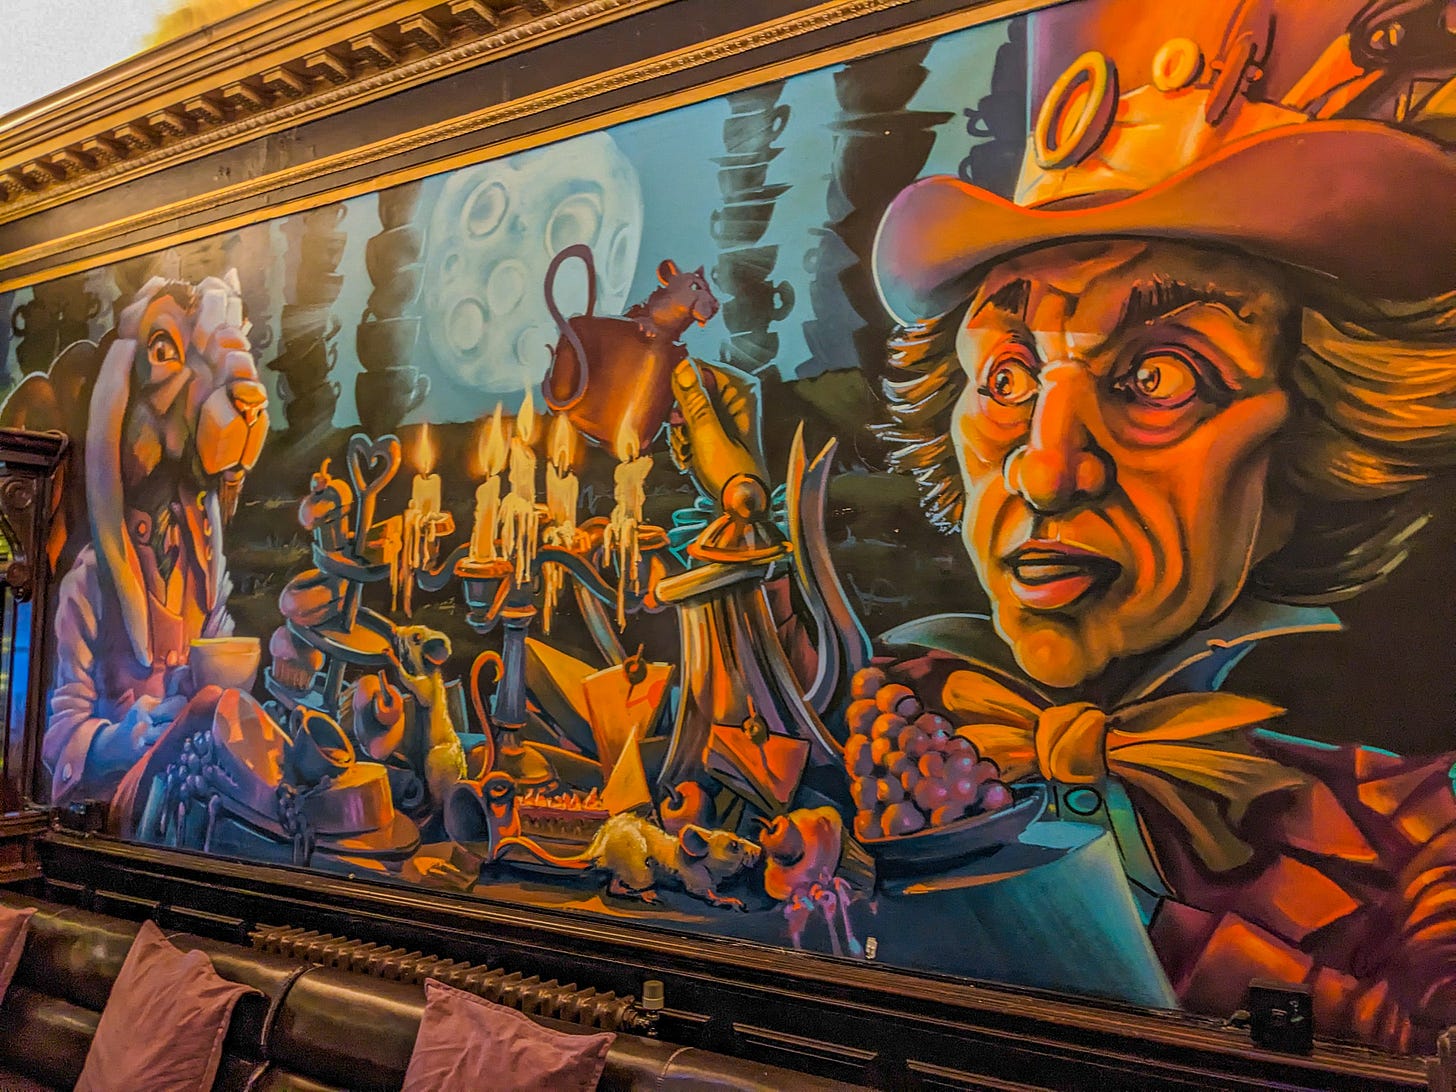 Mural showing the White Rabbit having tea with the Mad Hatter. 